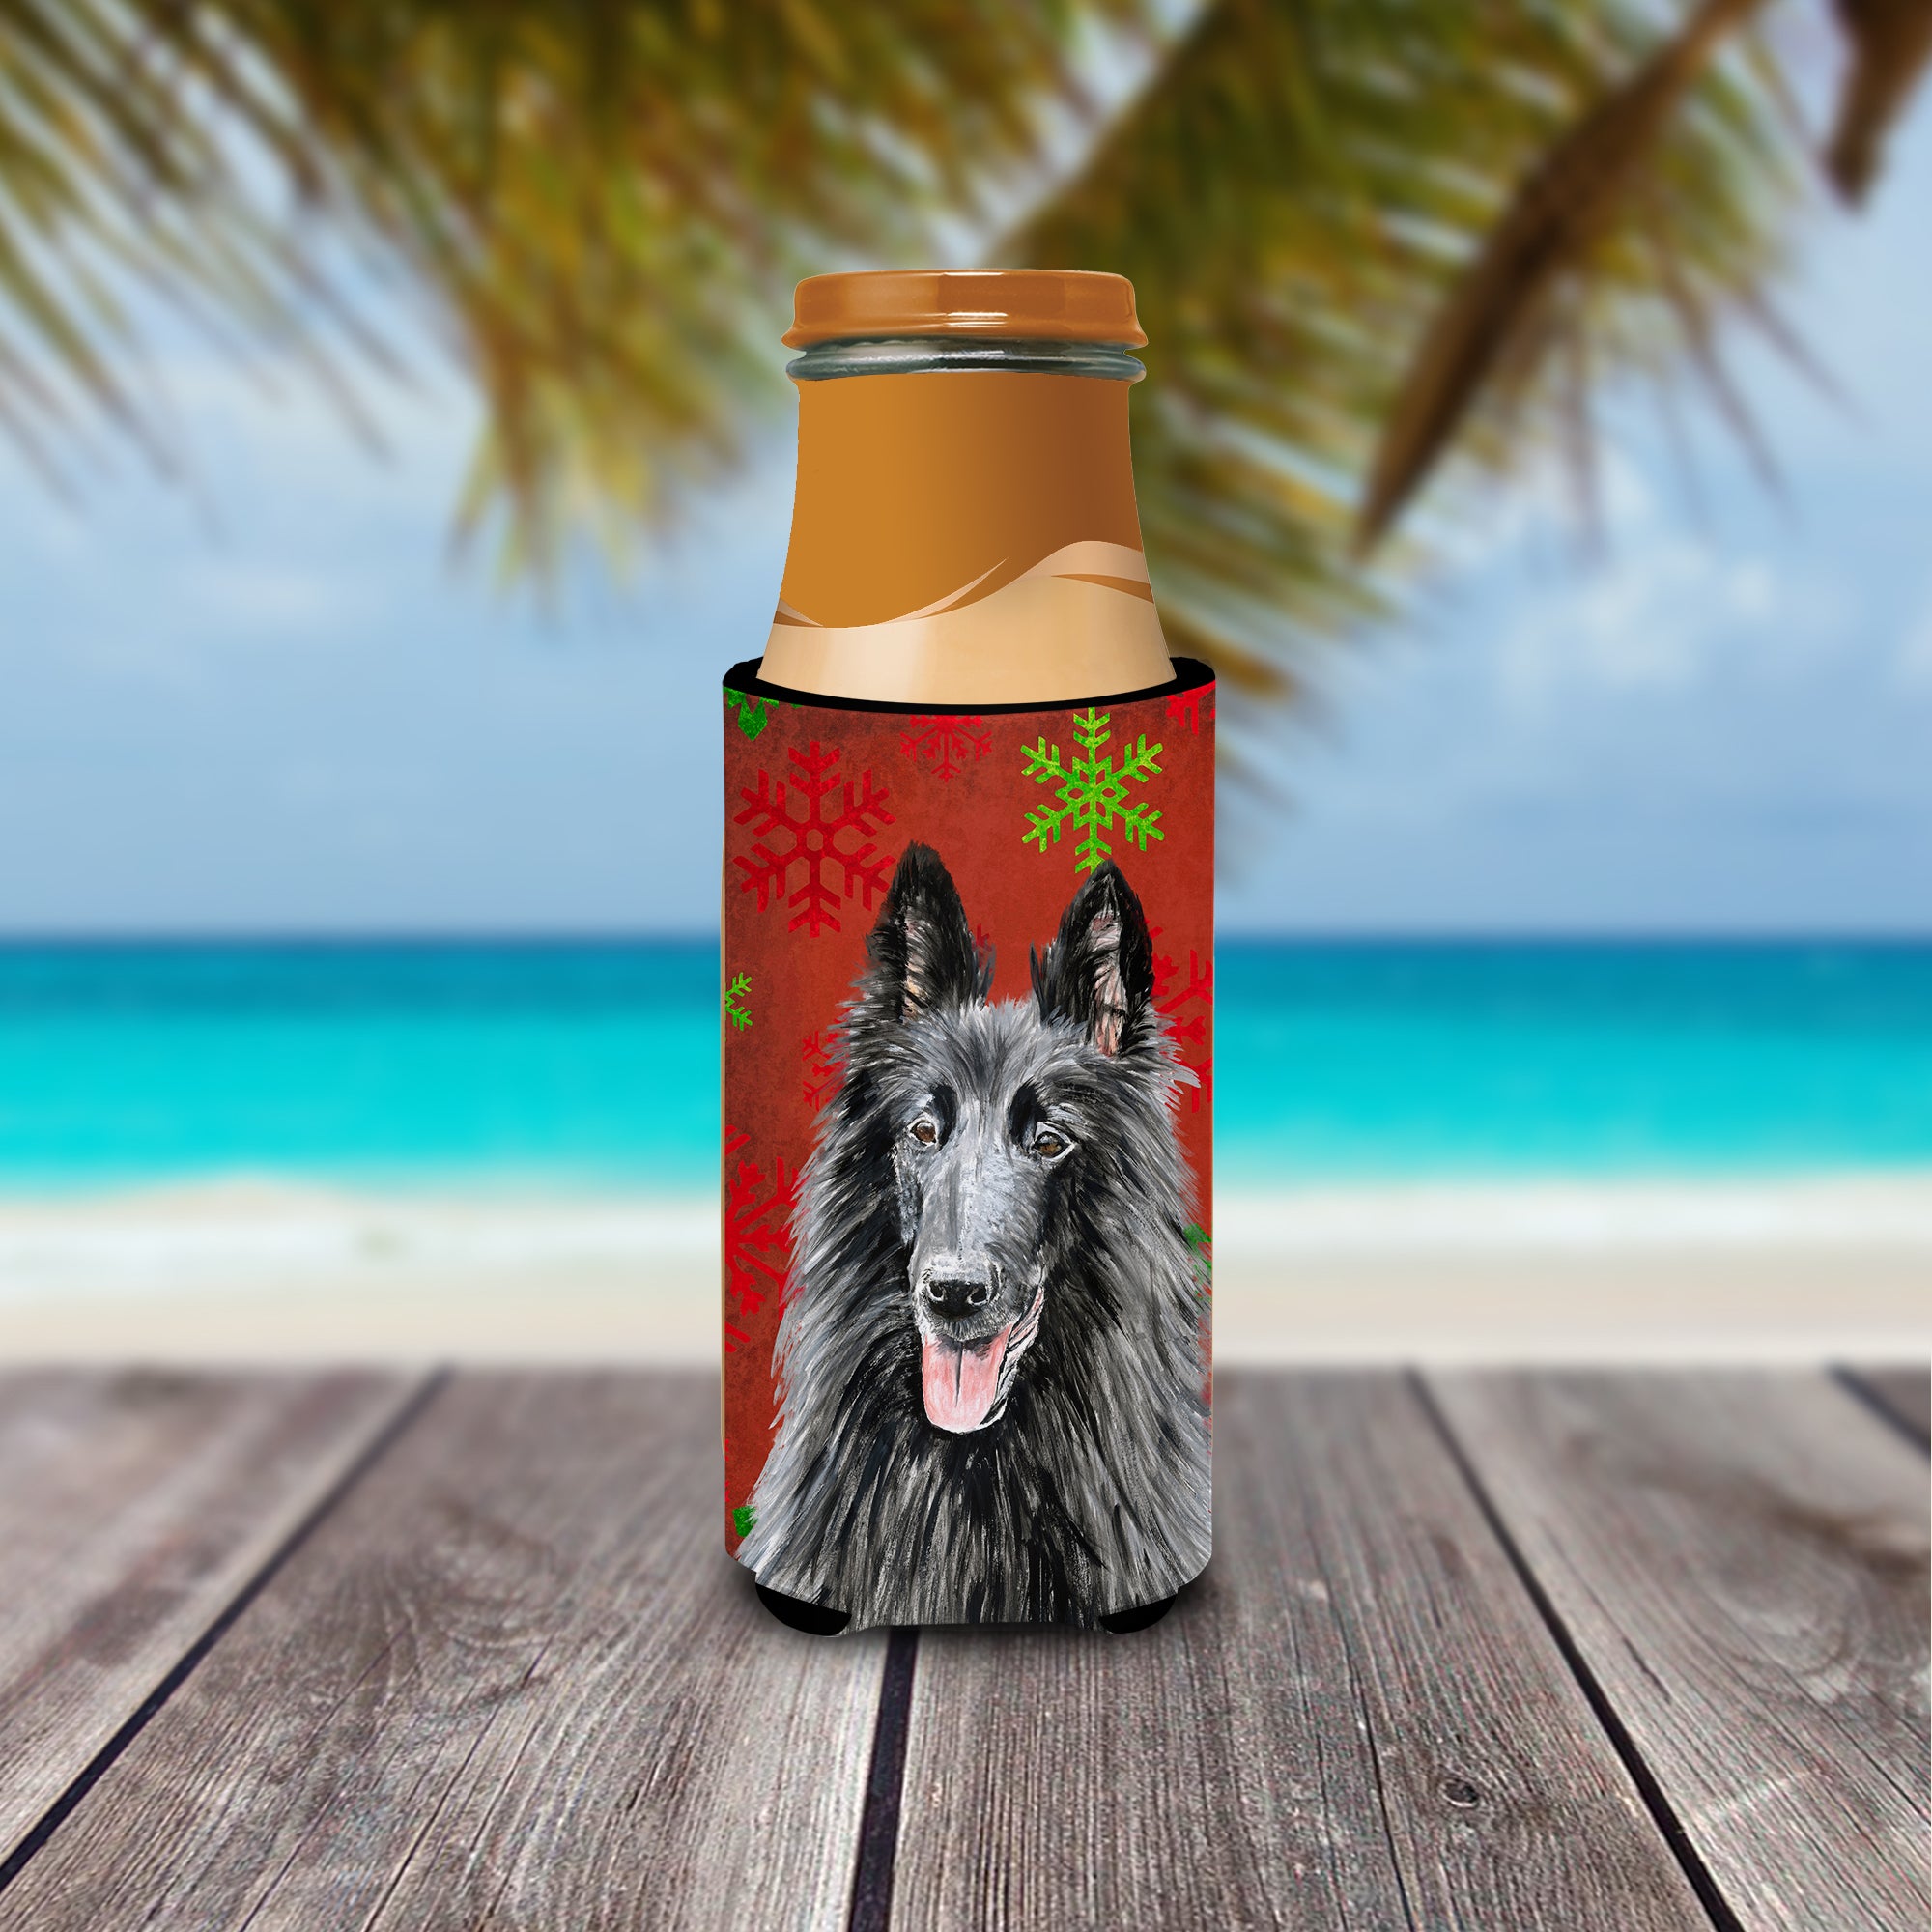 Belgian Sheepdog Red and Green Snowflakes Holiday Christmas Ultra Beverage Insulators for slim cans SC9438MUK.